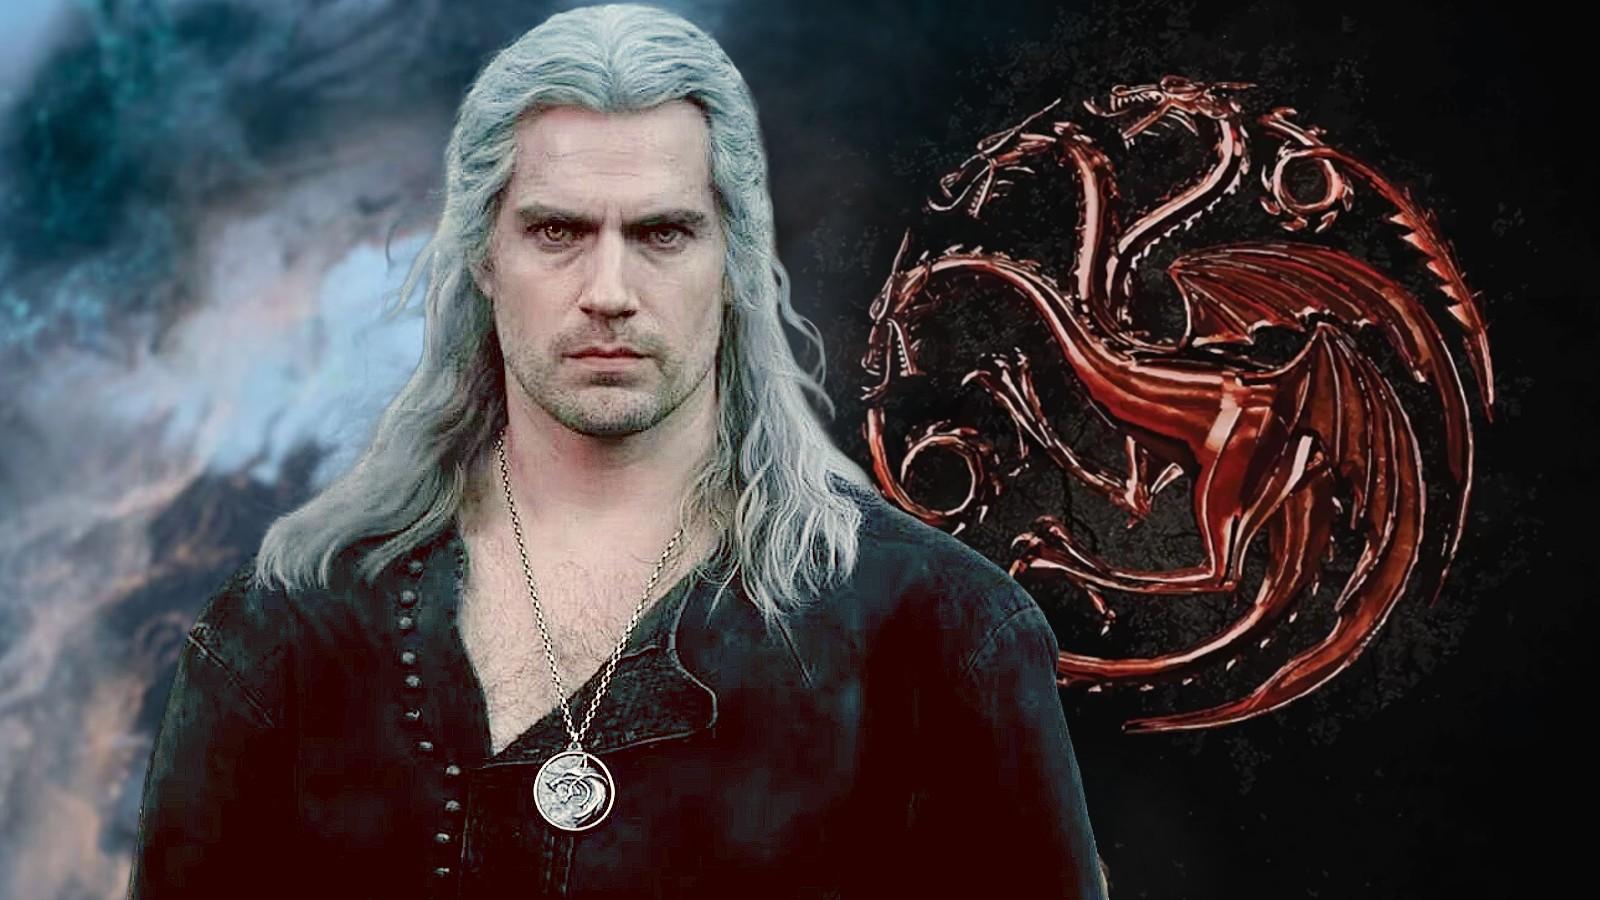 Henry Cavill as The Witcher and the logo for House of the Dragon